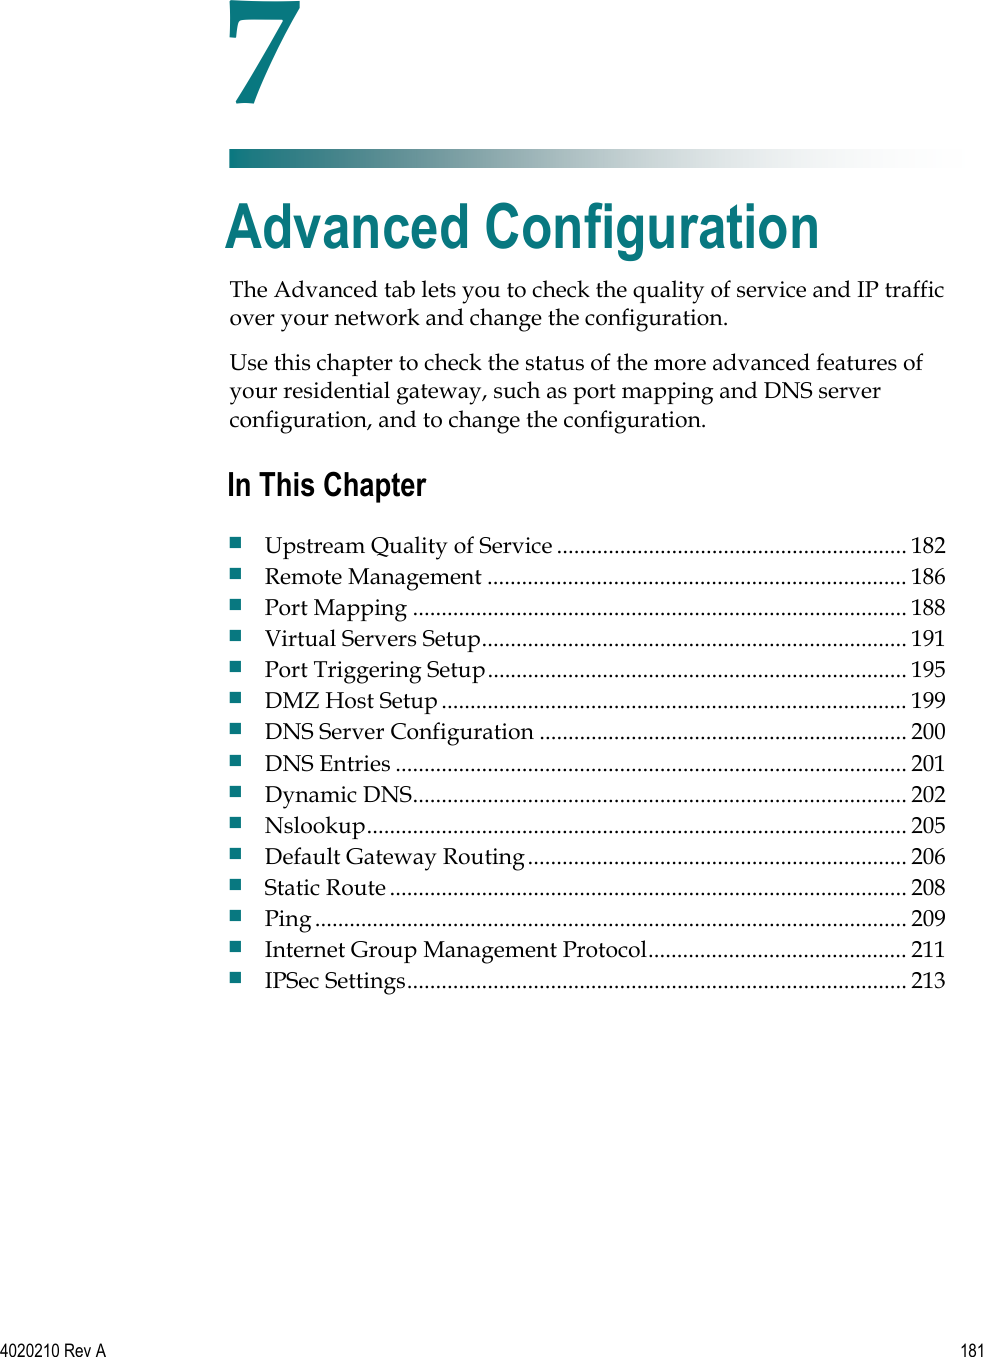   4020210 Rev A 181  The Advanced tab lets you to check the quality of service and IP traffic over your network and change the configuration. Use this chapter to check the status of the more advanced features of your residential gateway, such as port mapping and DNS server configuration, and to change the configuration.    7 Chapter 7 Advanced Configuration In This Chapter  Upstream Quality of Service ............................................................. 182  Remote Management ......................................................................... 186  Port Mapping ...................................................................................... 188  Virtual Servers Setup.......................................................................... 191  Port Triggering Setup......................................................................... 195  DMZ Host Setup................................................................................. 199  DNS Server Configuration ................................................................ 200  DNS Entries ......................................................................................... 201  Dynamic DNS...................................................................................... 202  Nslookup.............................................................................................. 205  Default Gateway Routing.................................................................. 206  Static Route .......................................................................................... 208  Ping....................................................................................................... 209  Internet Group Management Protocol............................................. 211  IPSec Settings....................................................................................... 213 